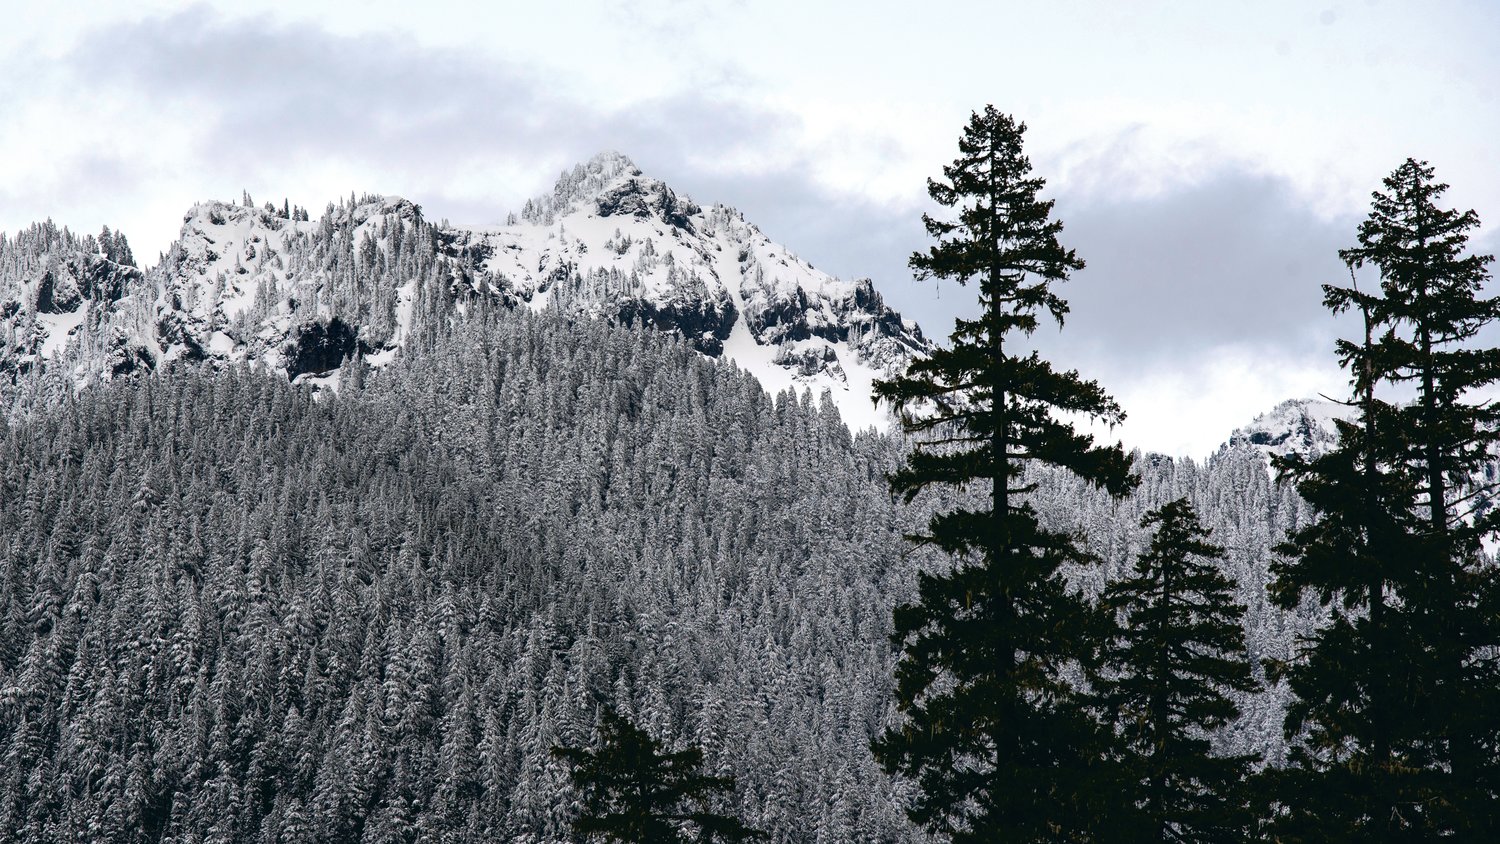 Snow covers trees in the foothills of Mount Rainier National Park on Thursday.